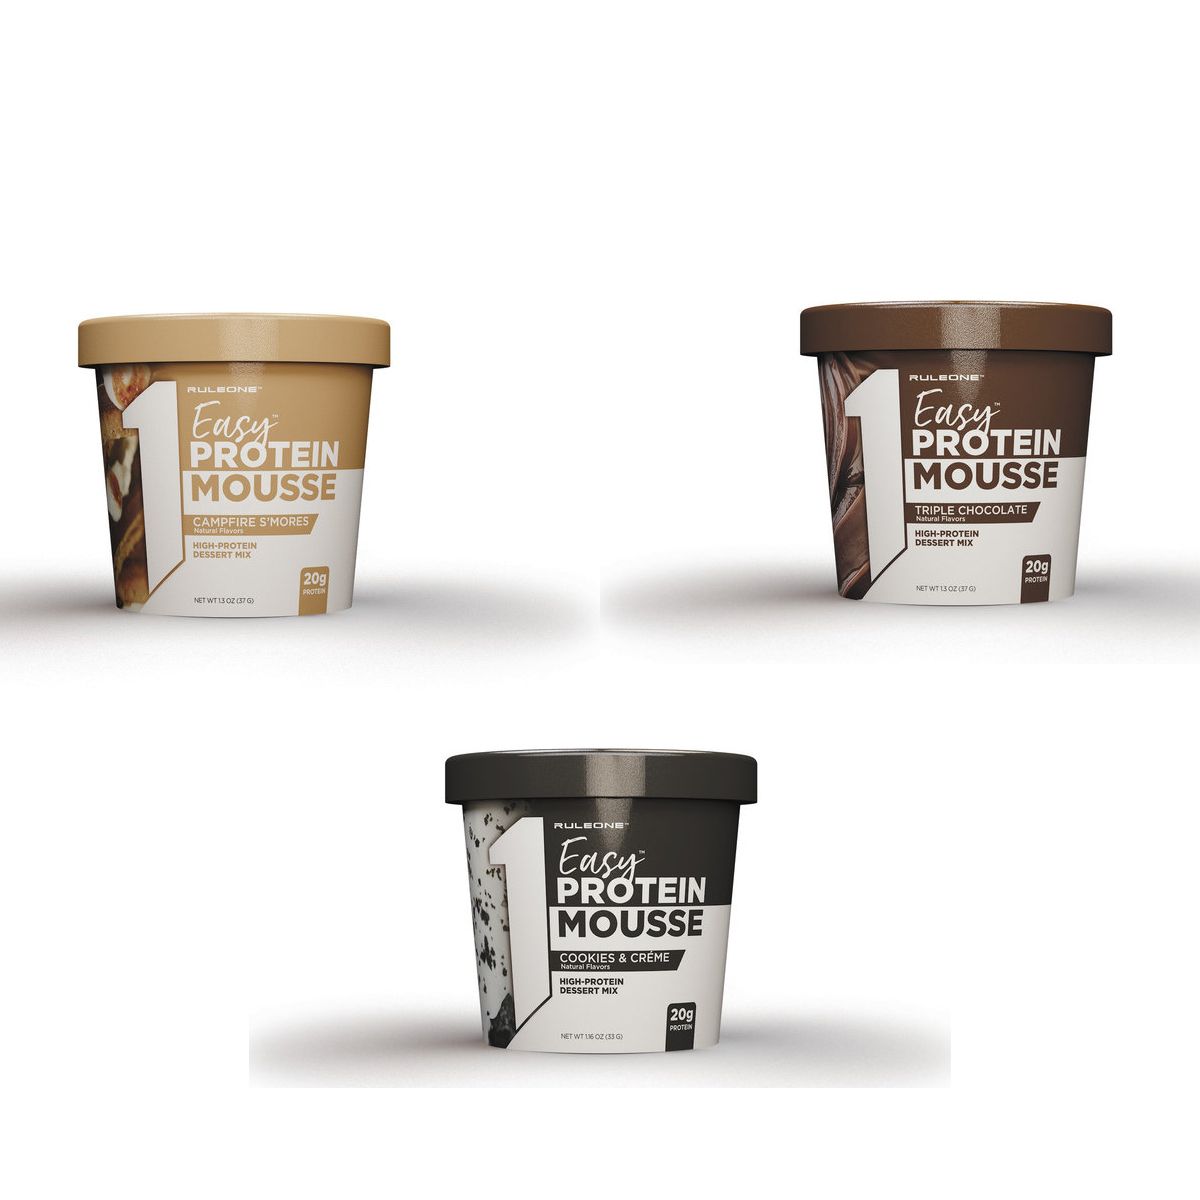 RULE1 - EASY PROTEIN MOUSSE - HIGH PROTEIN DESSERT MIX - 6x37 G